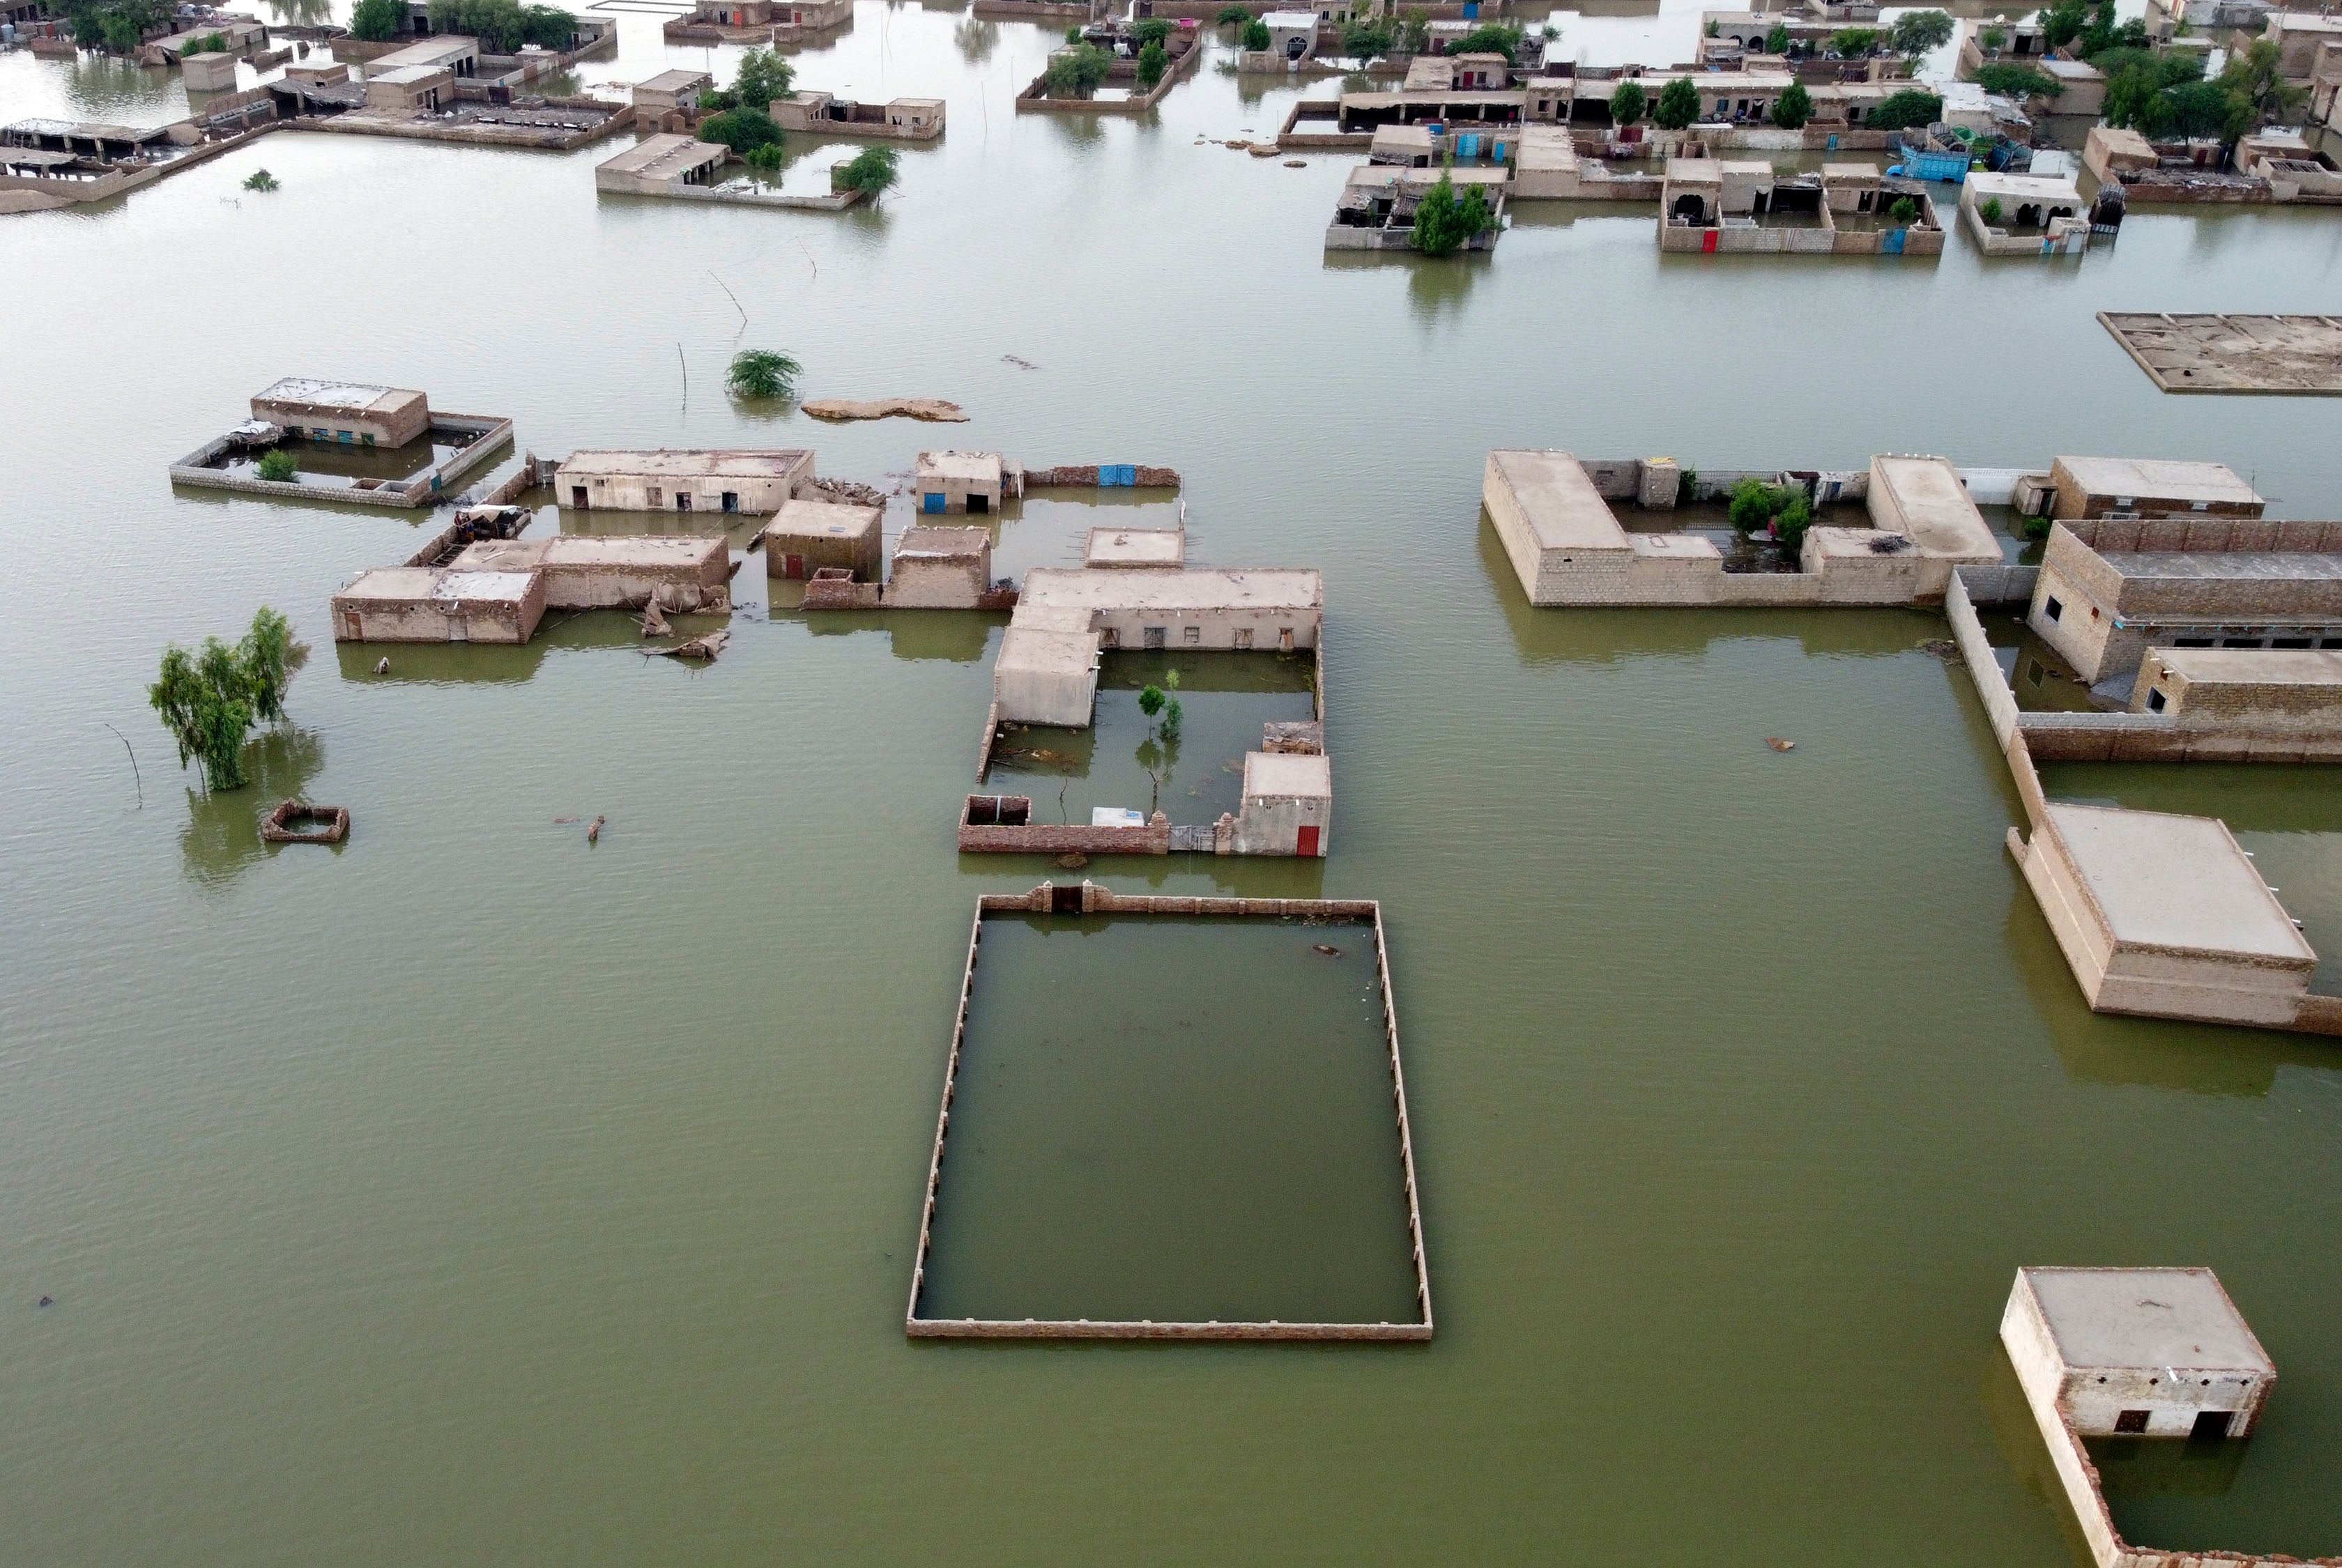 According to initial government estimates, the devastation has caused $10bn in damage